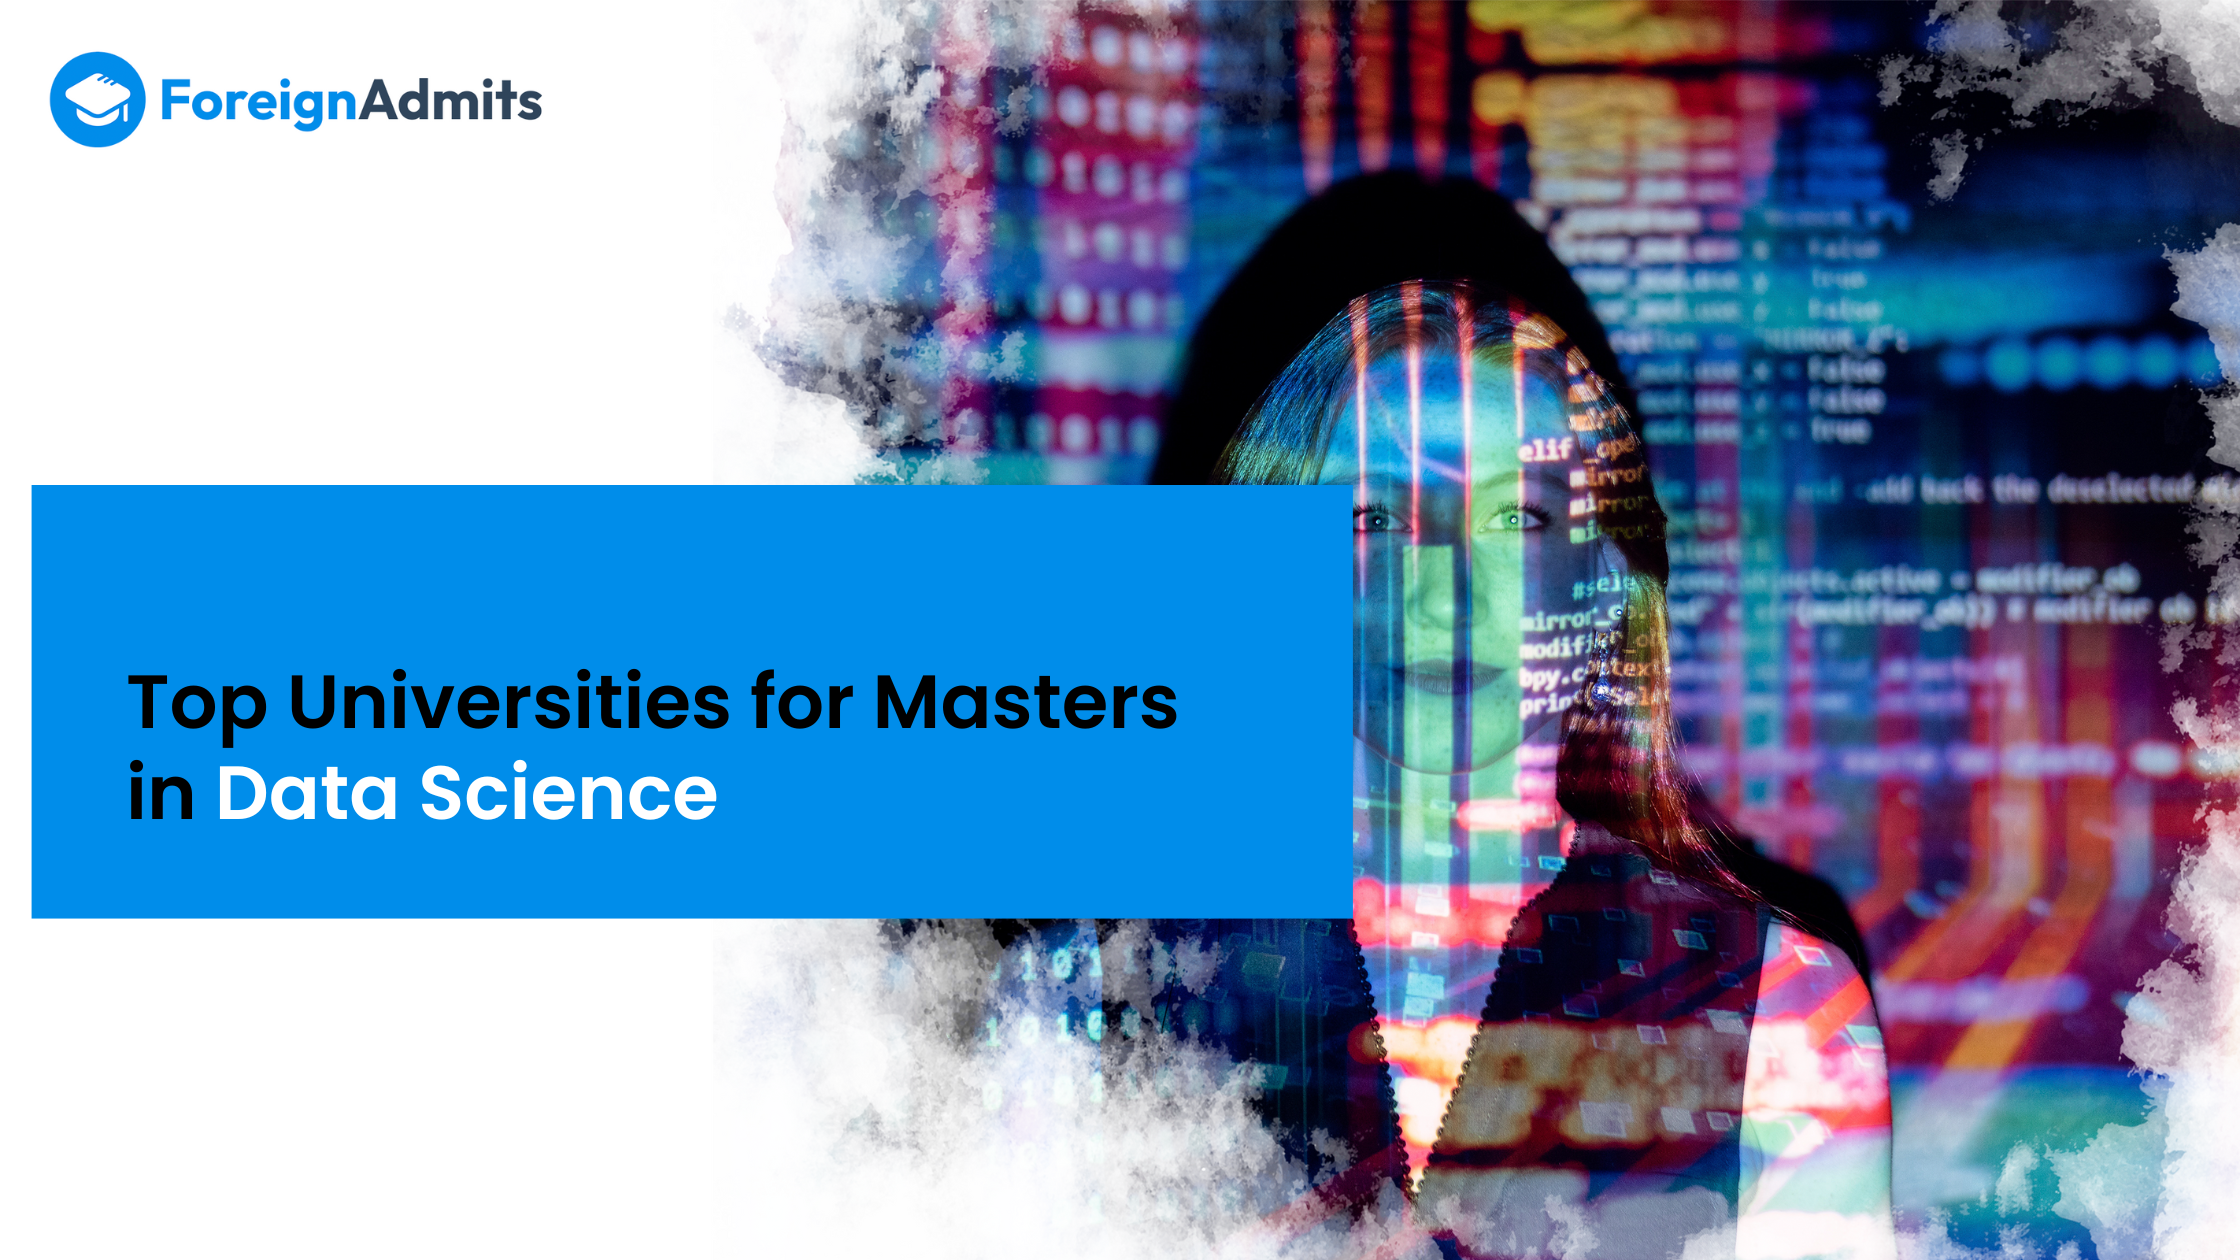 Top Universities for Masters in Data Science Worldwide